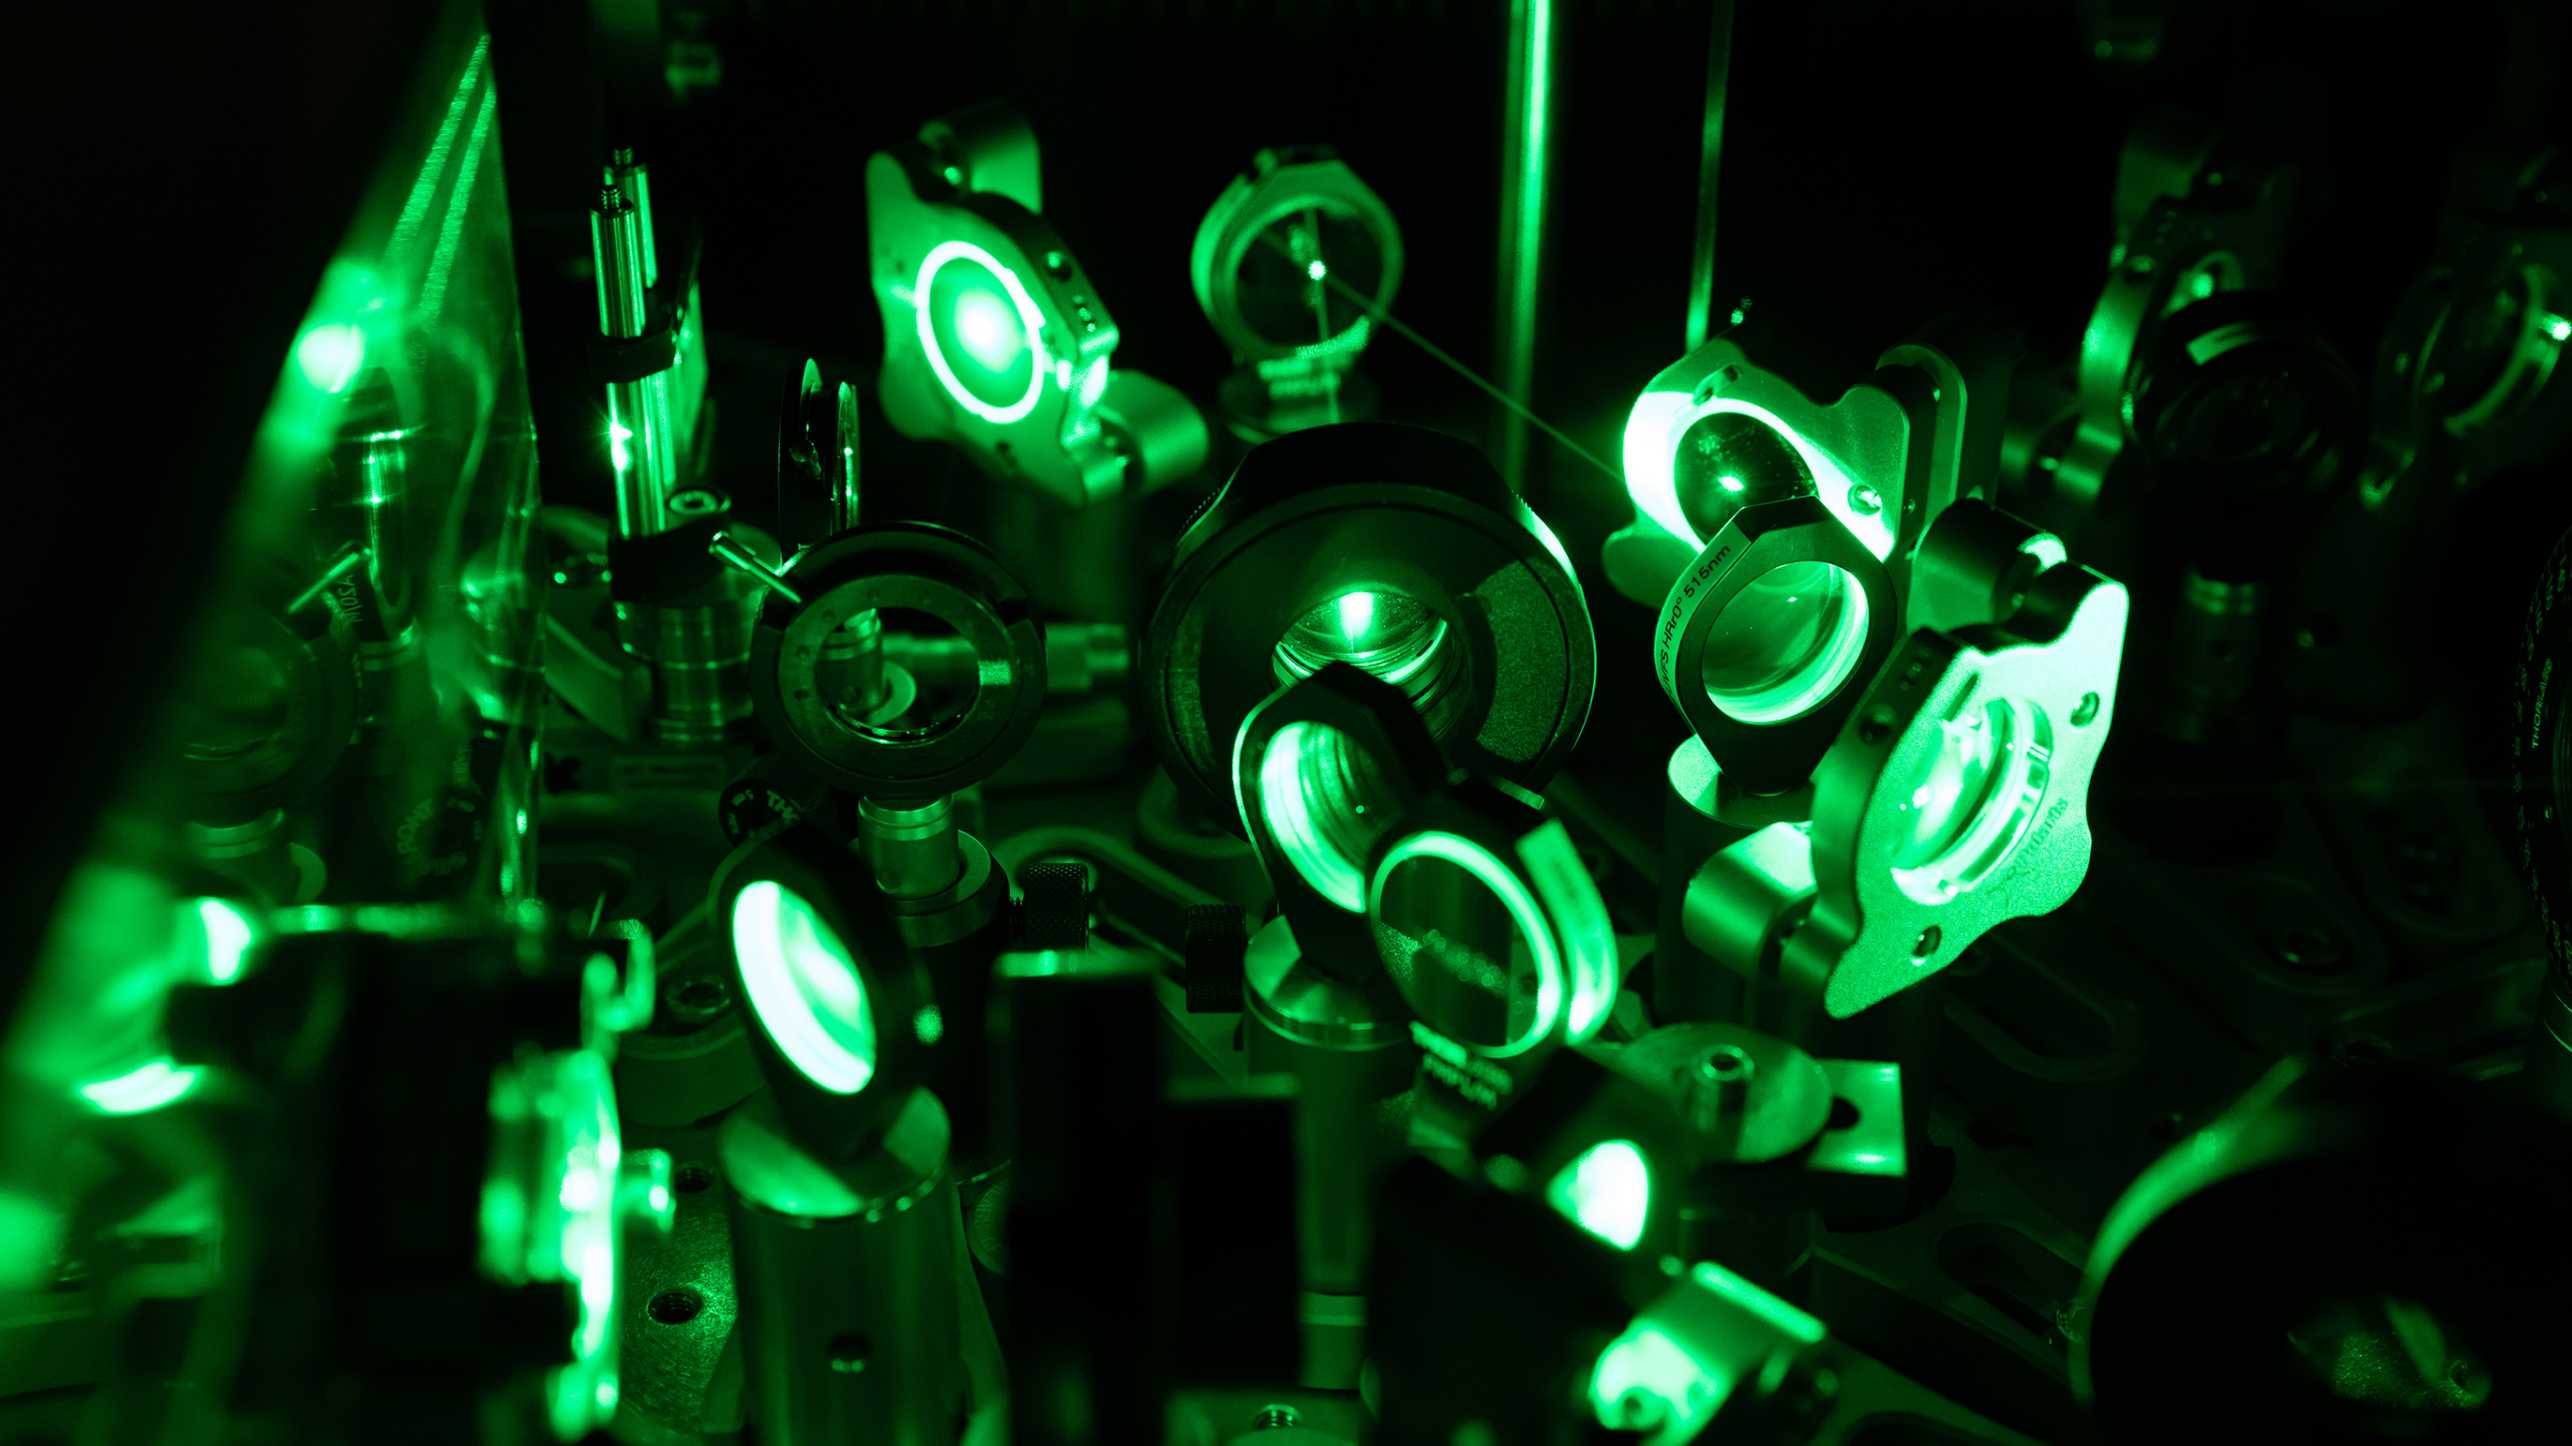 Green laser beam on mirrors and lenses